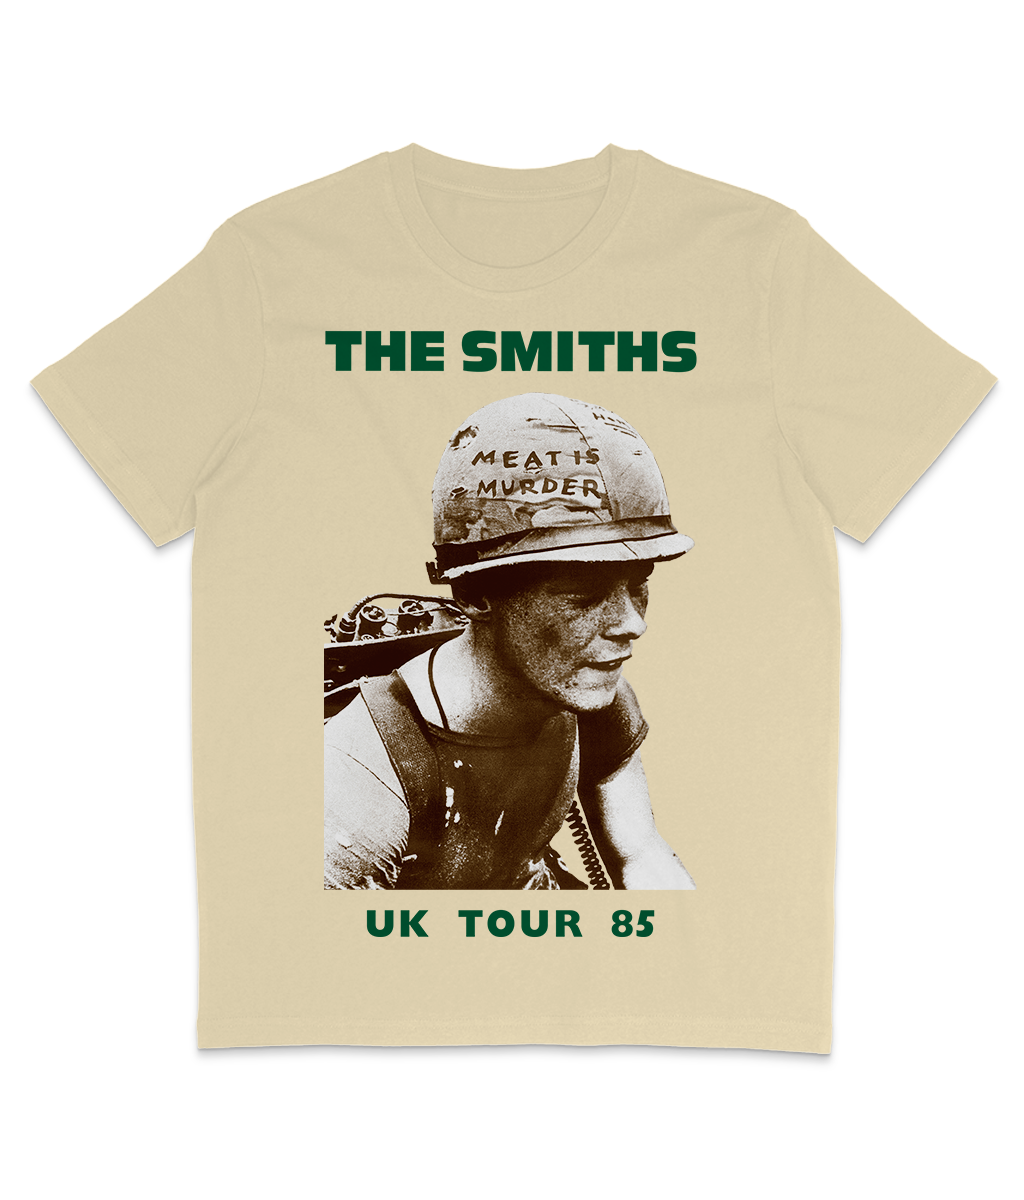 THE SMITHS - Meat Is Murder Tour 1985 - Soldier - Green Text